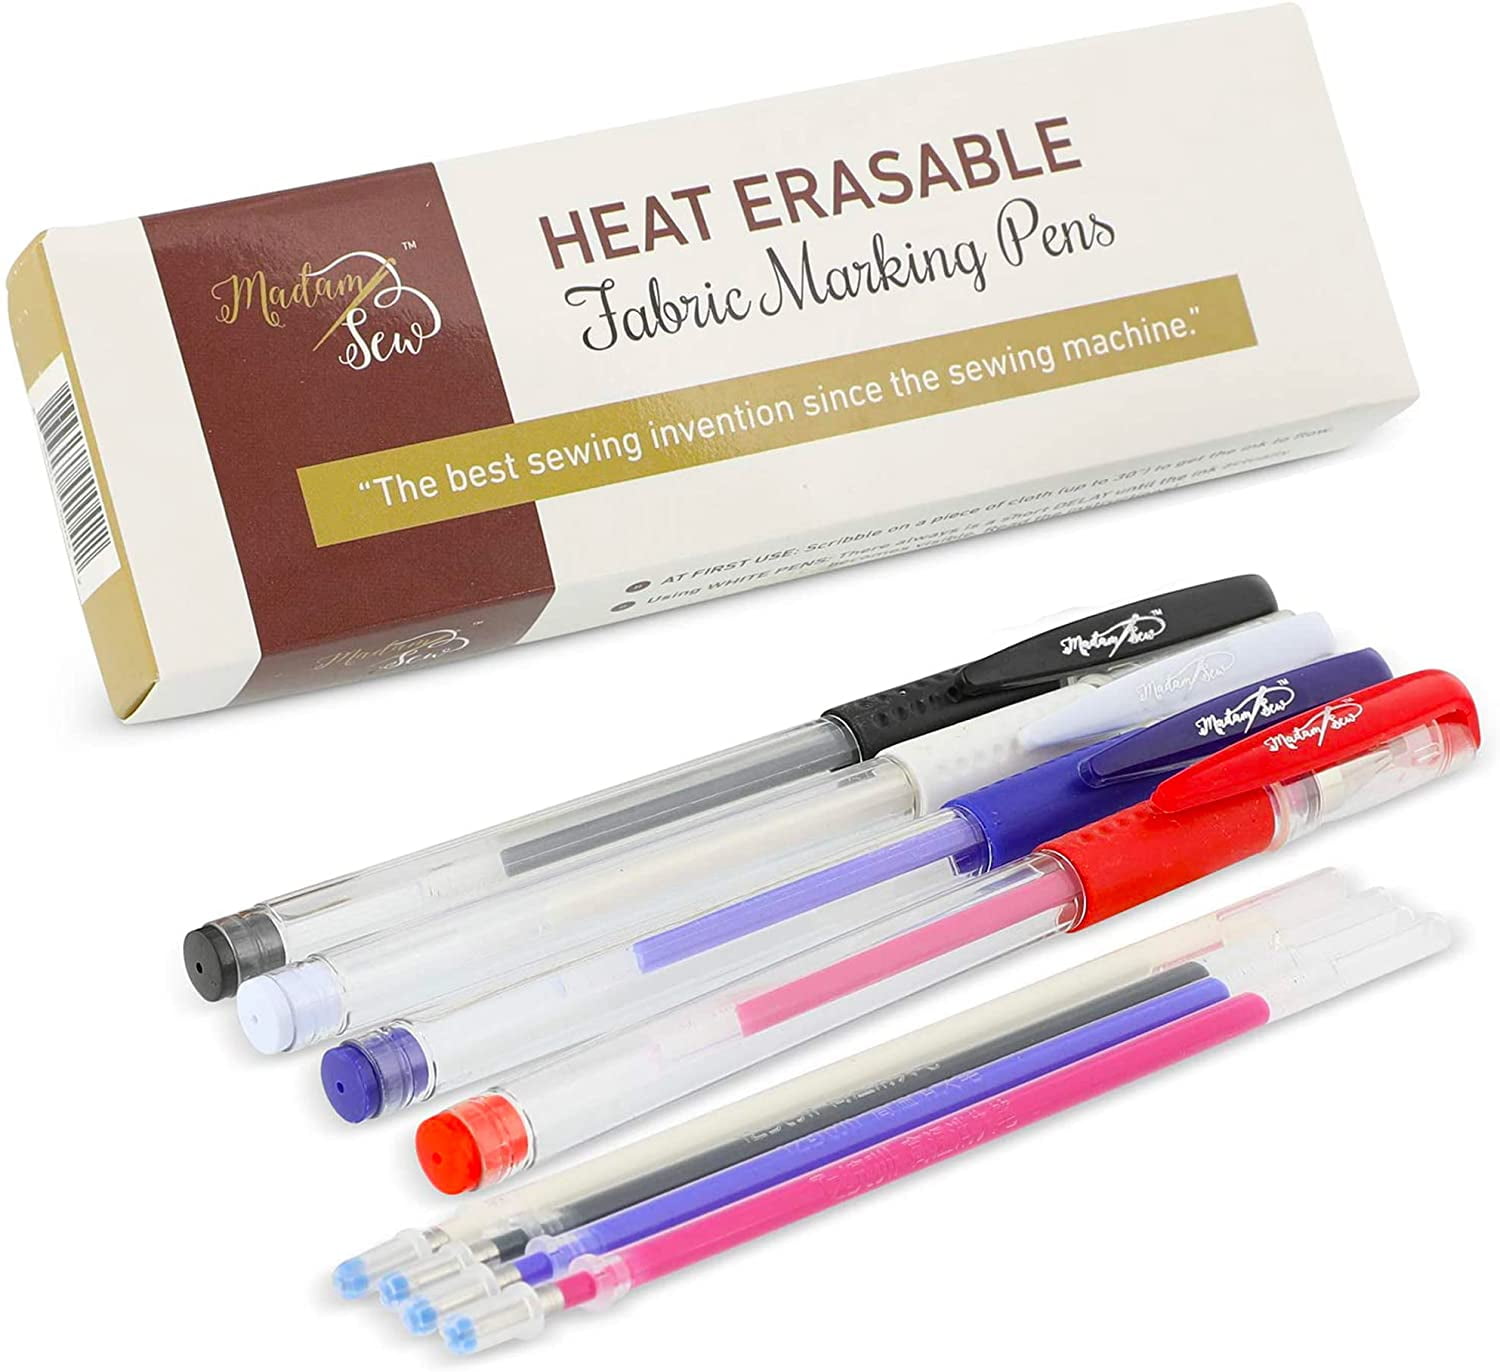 AIEX 4 Colors Heat Erasable Pens Fabric Marking Pens with Pink Caps with 20  Refills for Quilting Sewing, Dressmaking, Fabrics, Tailors Sewing